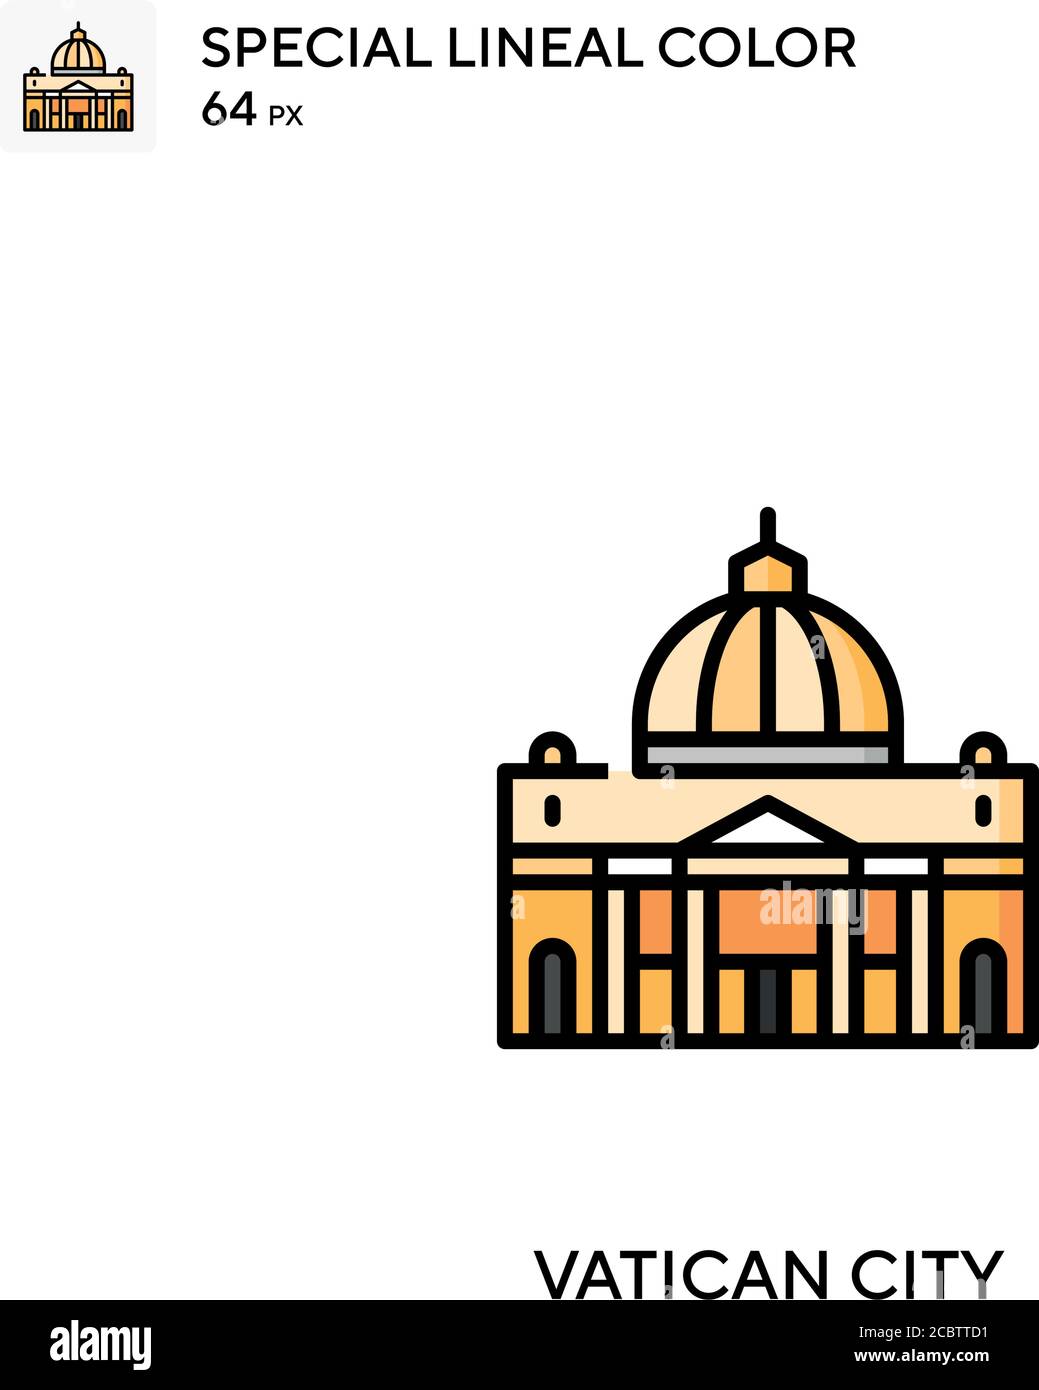 Vatican city Special lineal color vector icon. Vatican city icons for your business project Stock Vector